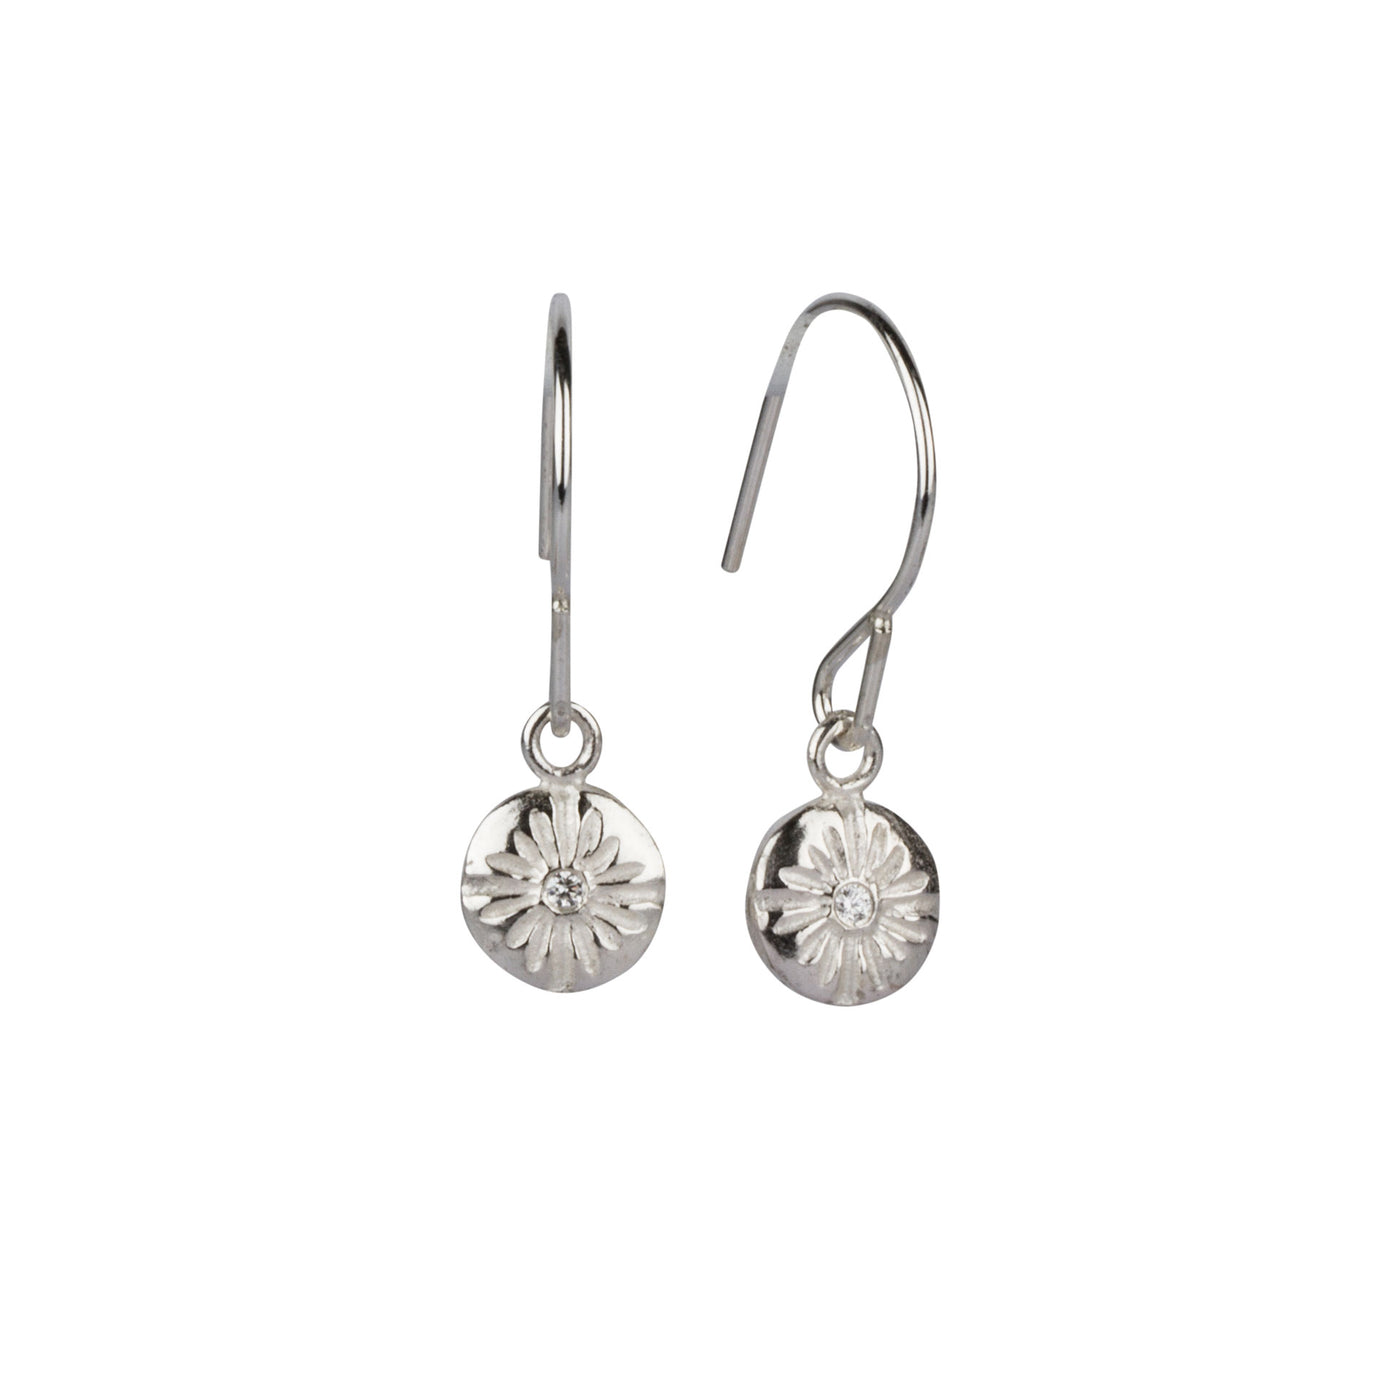 Lucia Small Dangle Earrings in Silver side view on a white background | Corey Egan